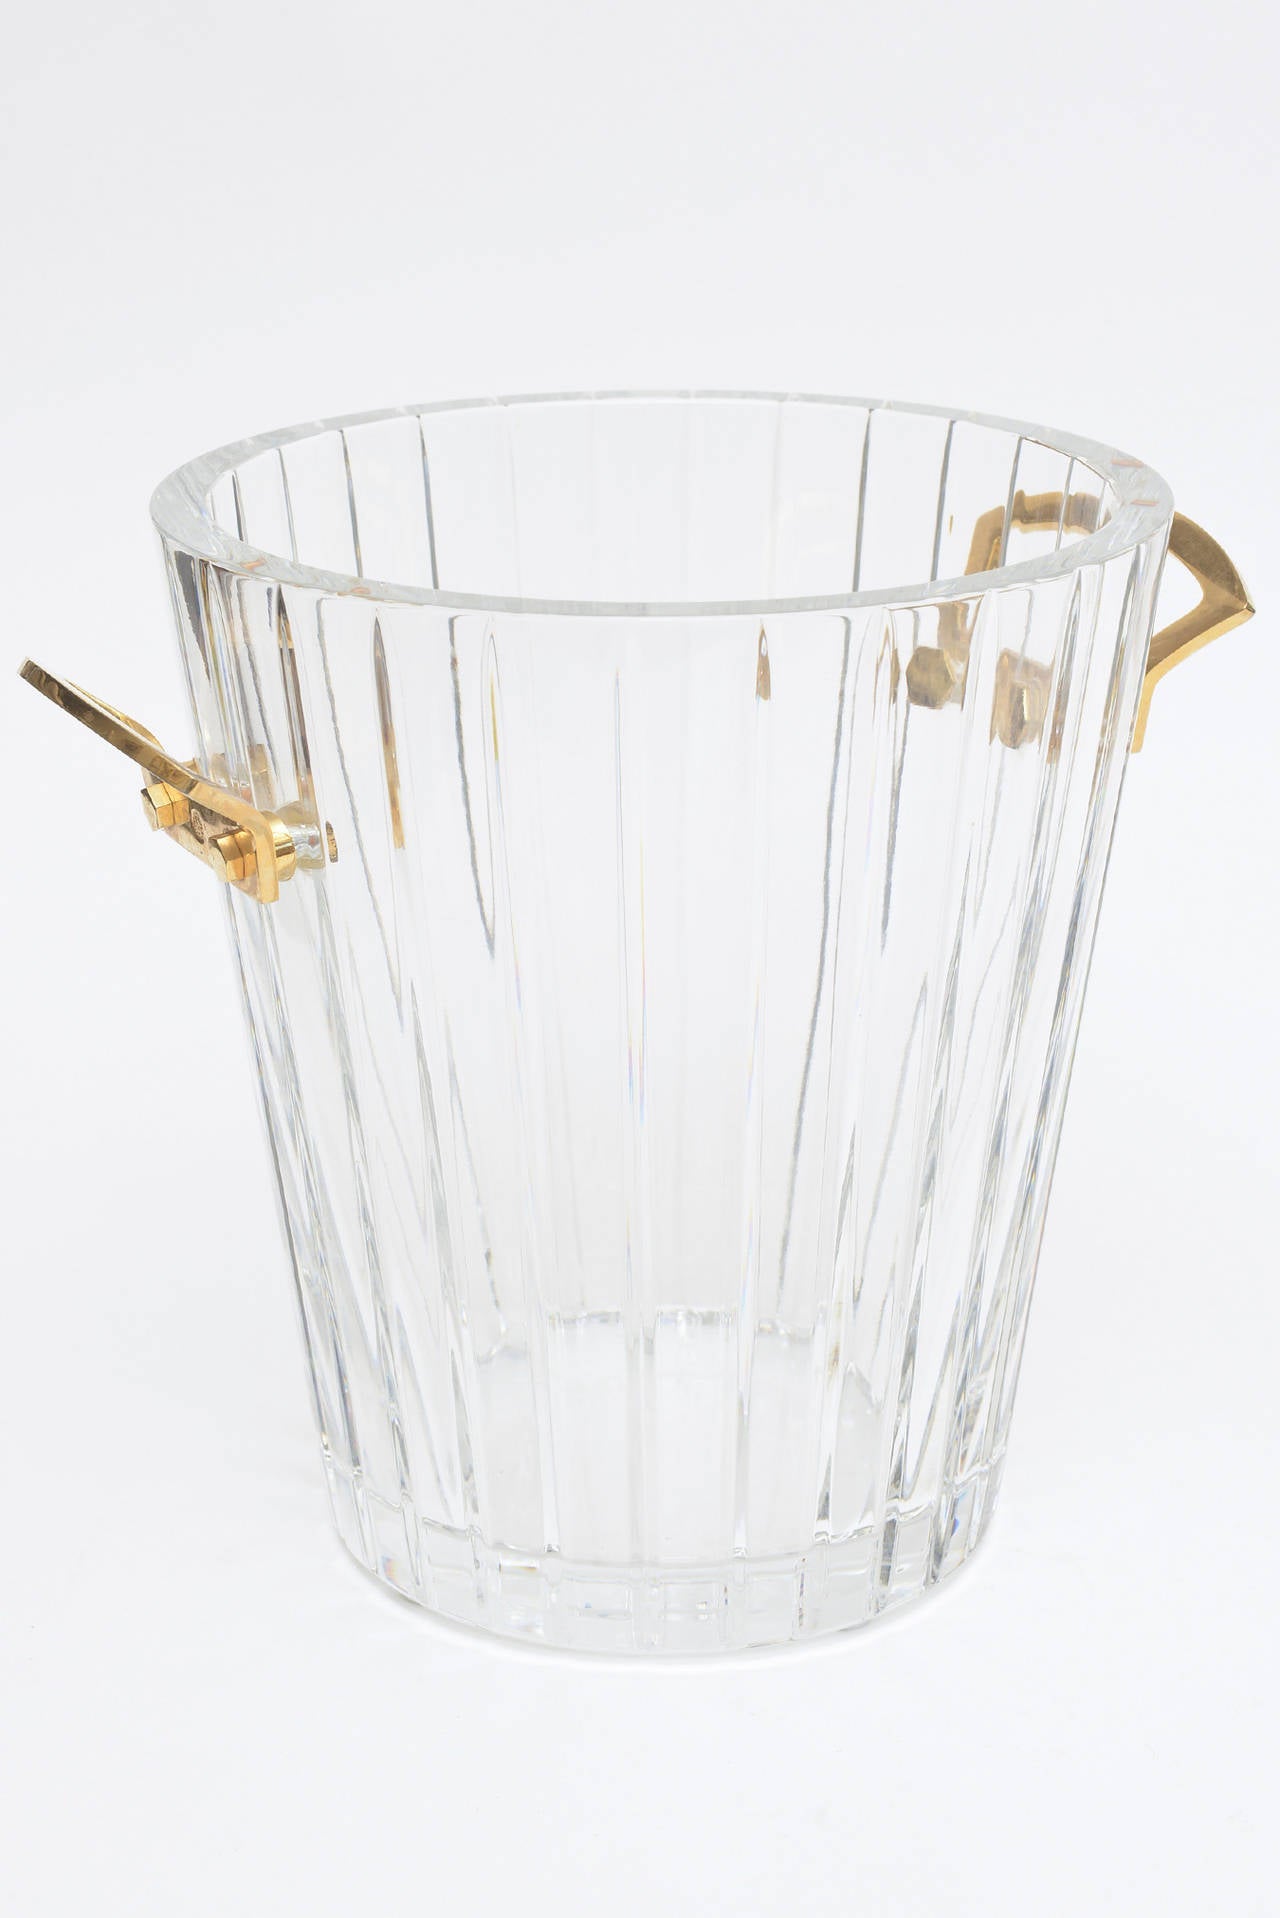 Classic, beautiful, elegant and timeless comes to mind when describing this heavy signed Baccarat crystal ice bucket or champagne chiller.
The sculptural heavy gilded bronze handles on either side add to the beauty of this classic piece. It has